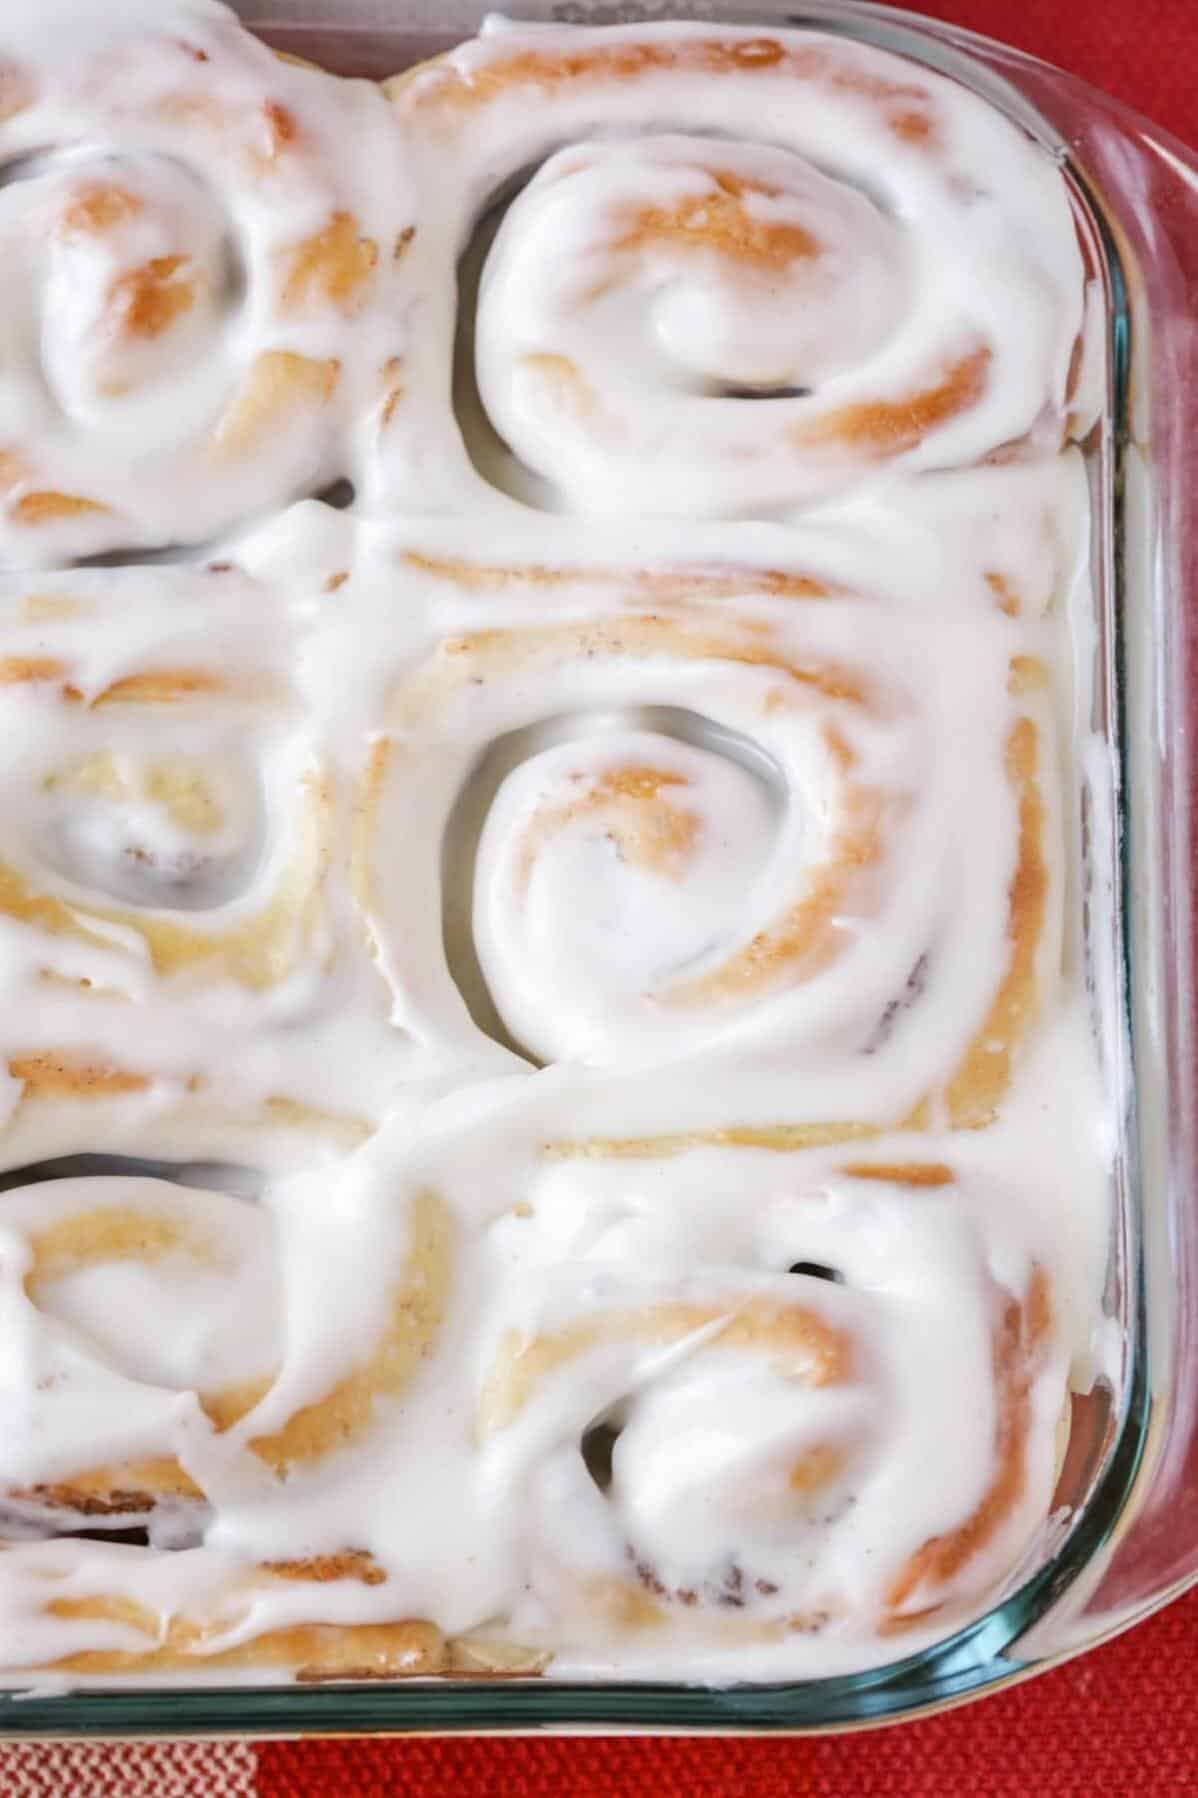  Jazz up your baked goods with a swirl of delicious cinnamon icing.